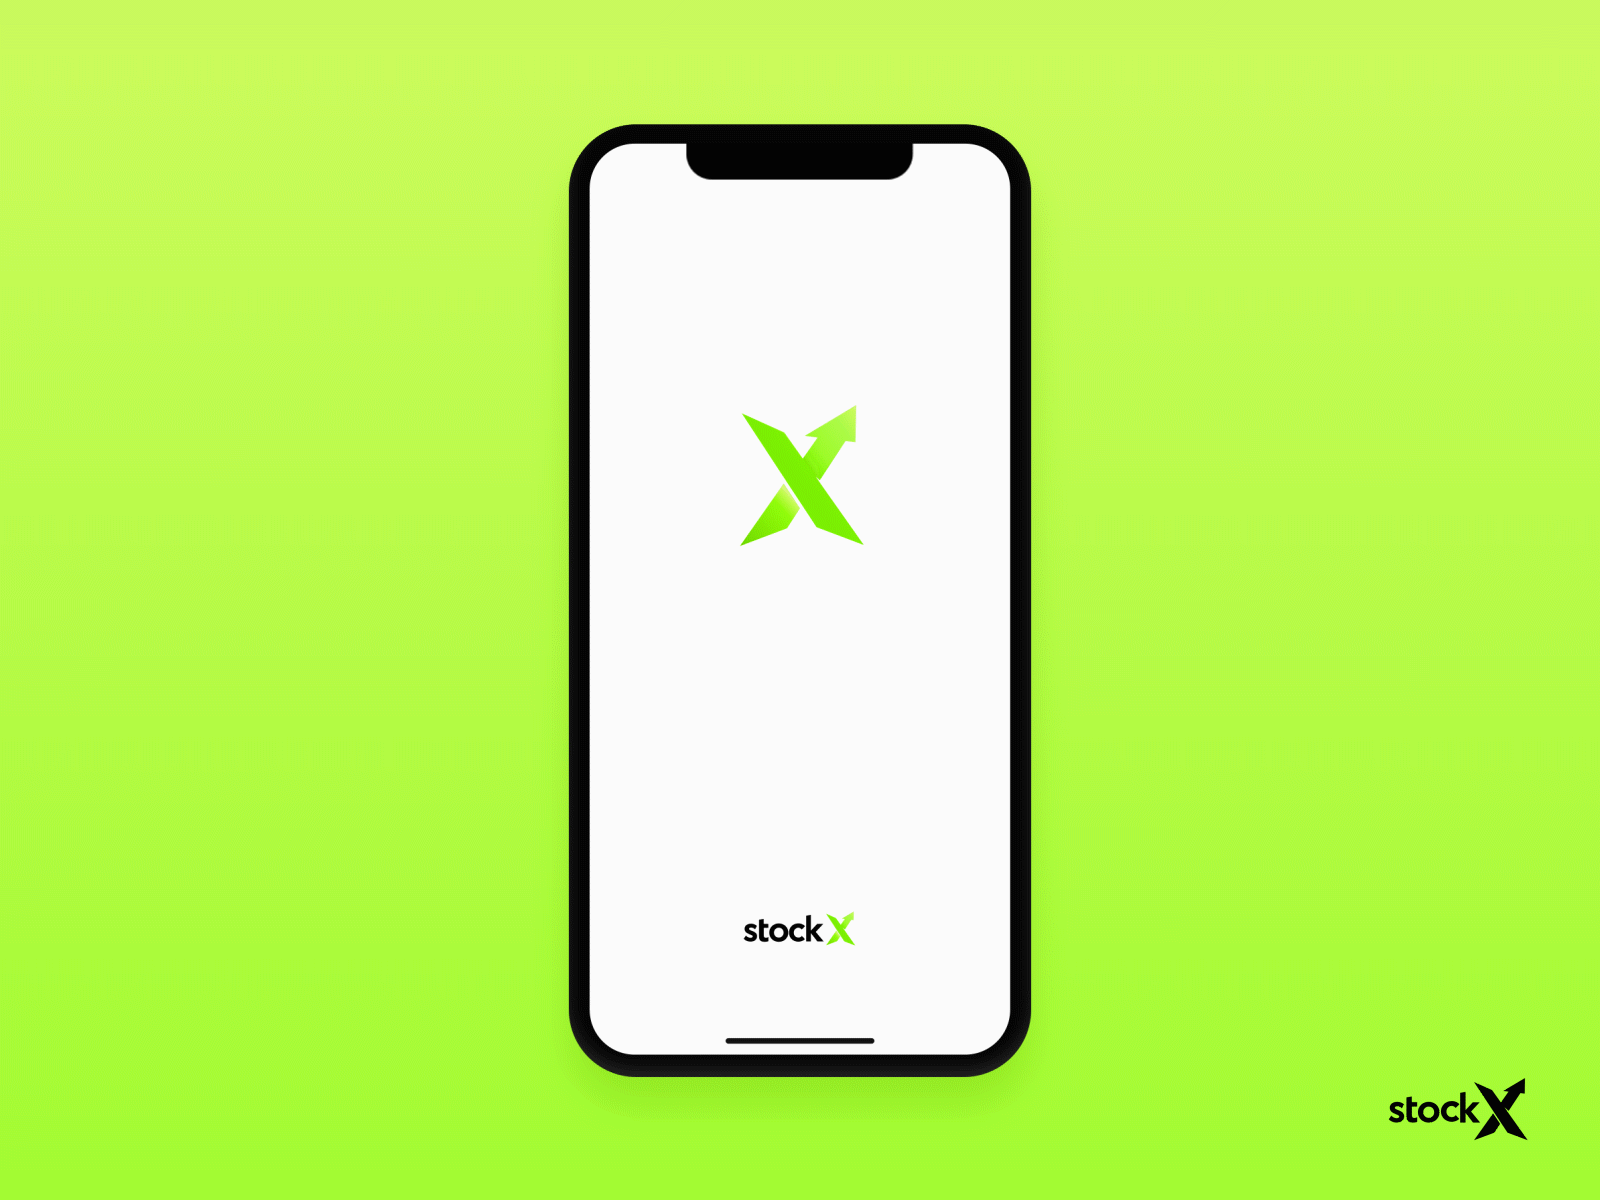 Stockx Landing Page